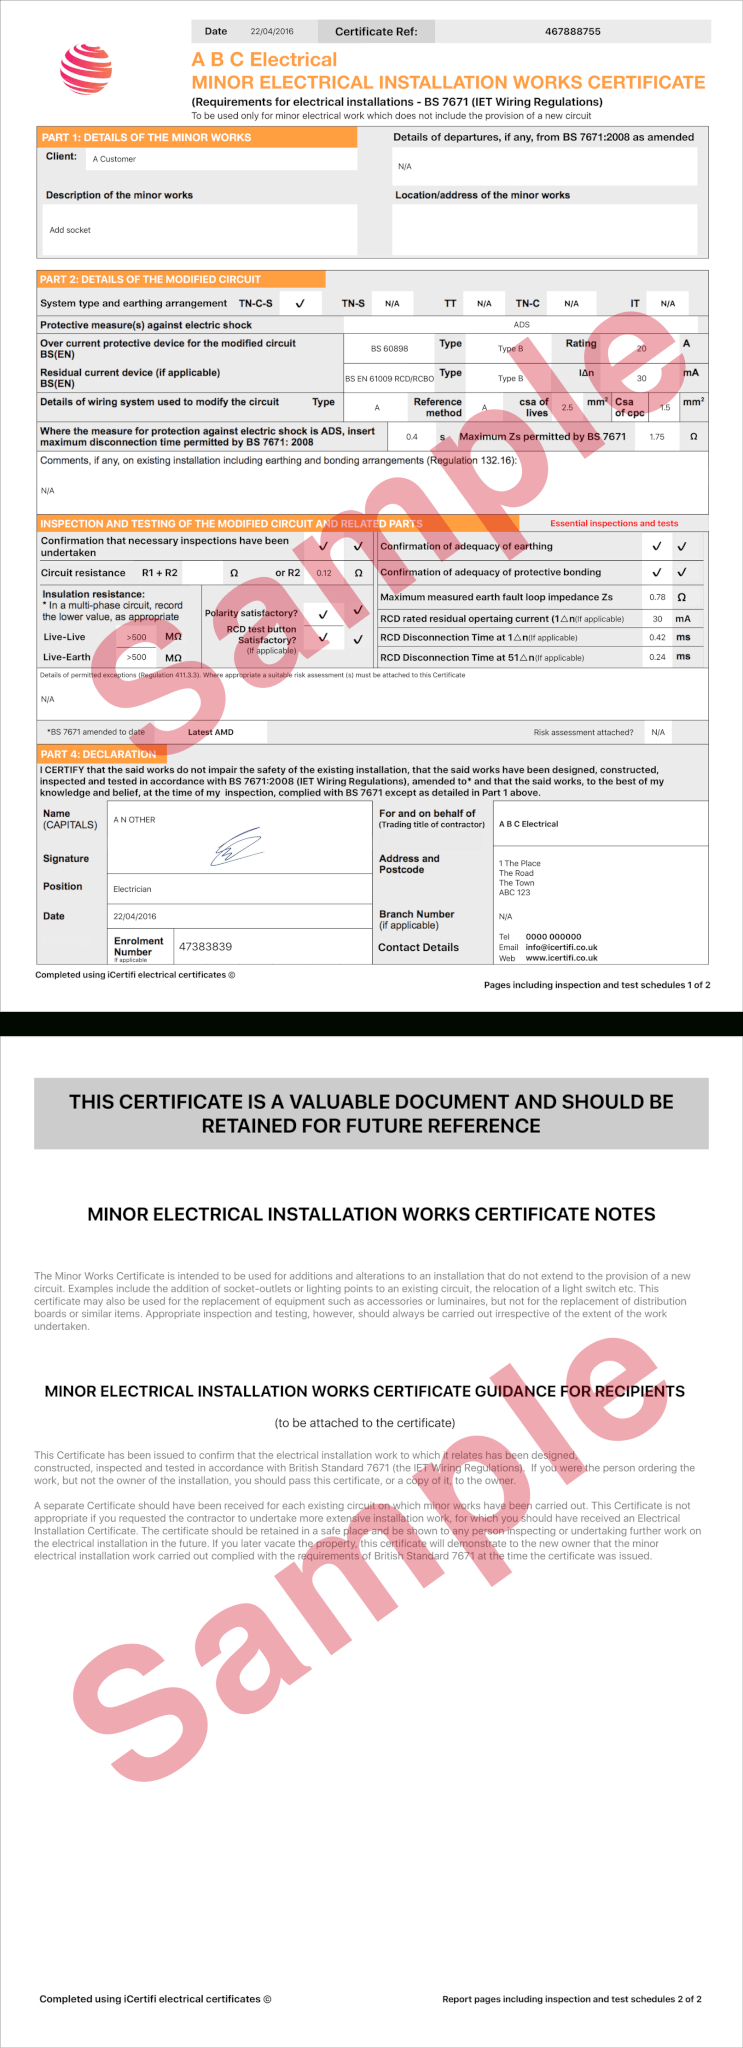 Electrical Certificate - Example Minor Works Certificate - Icertifi for Electrical Minor Works Certificate Template